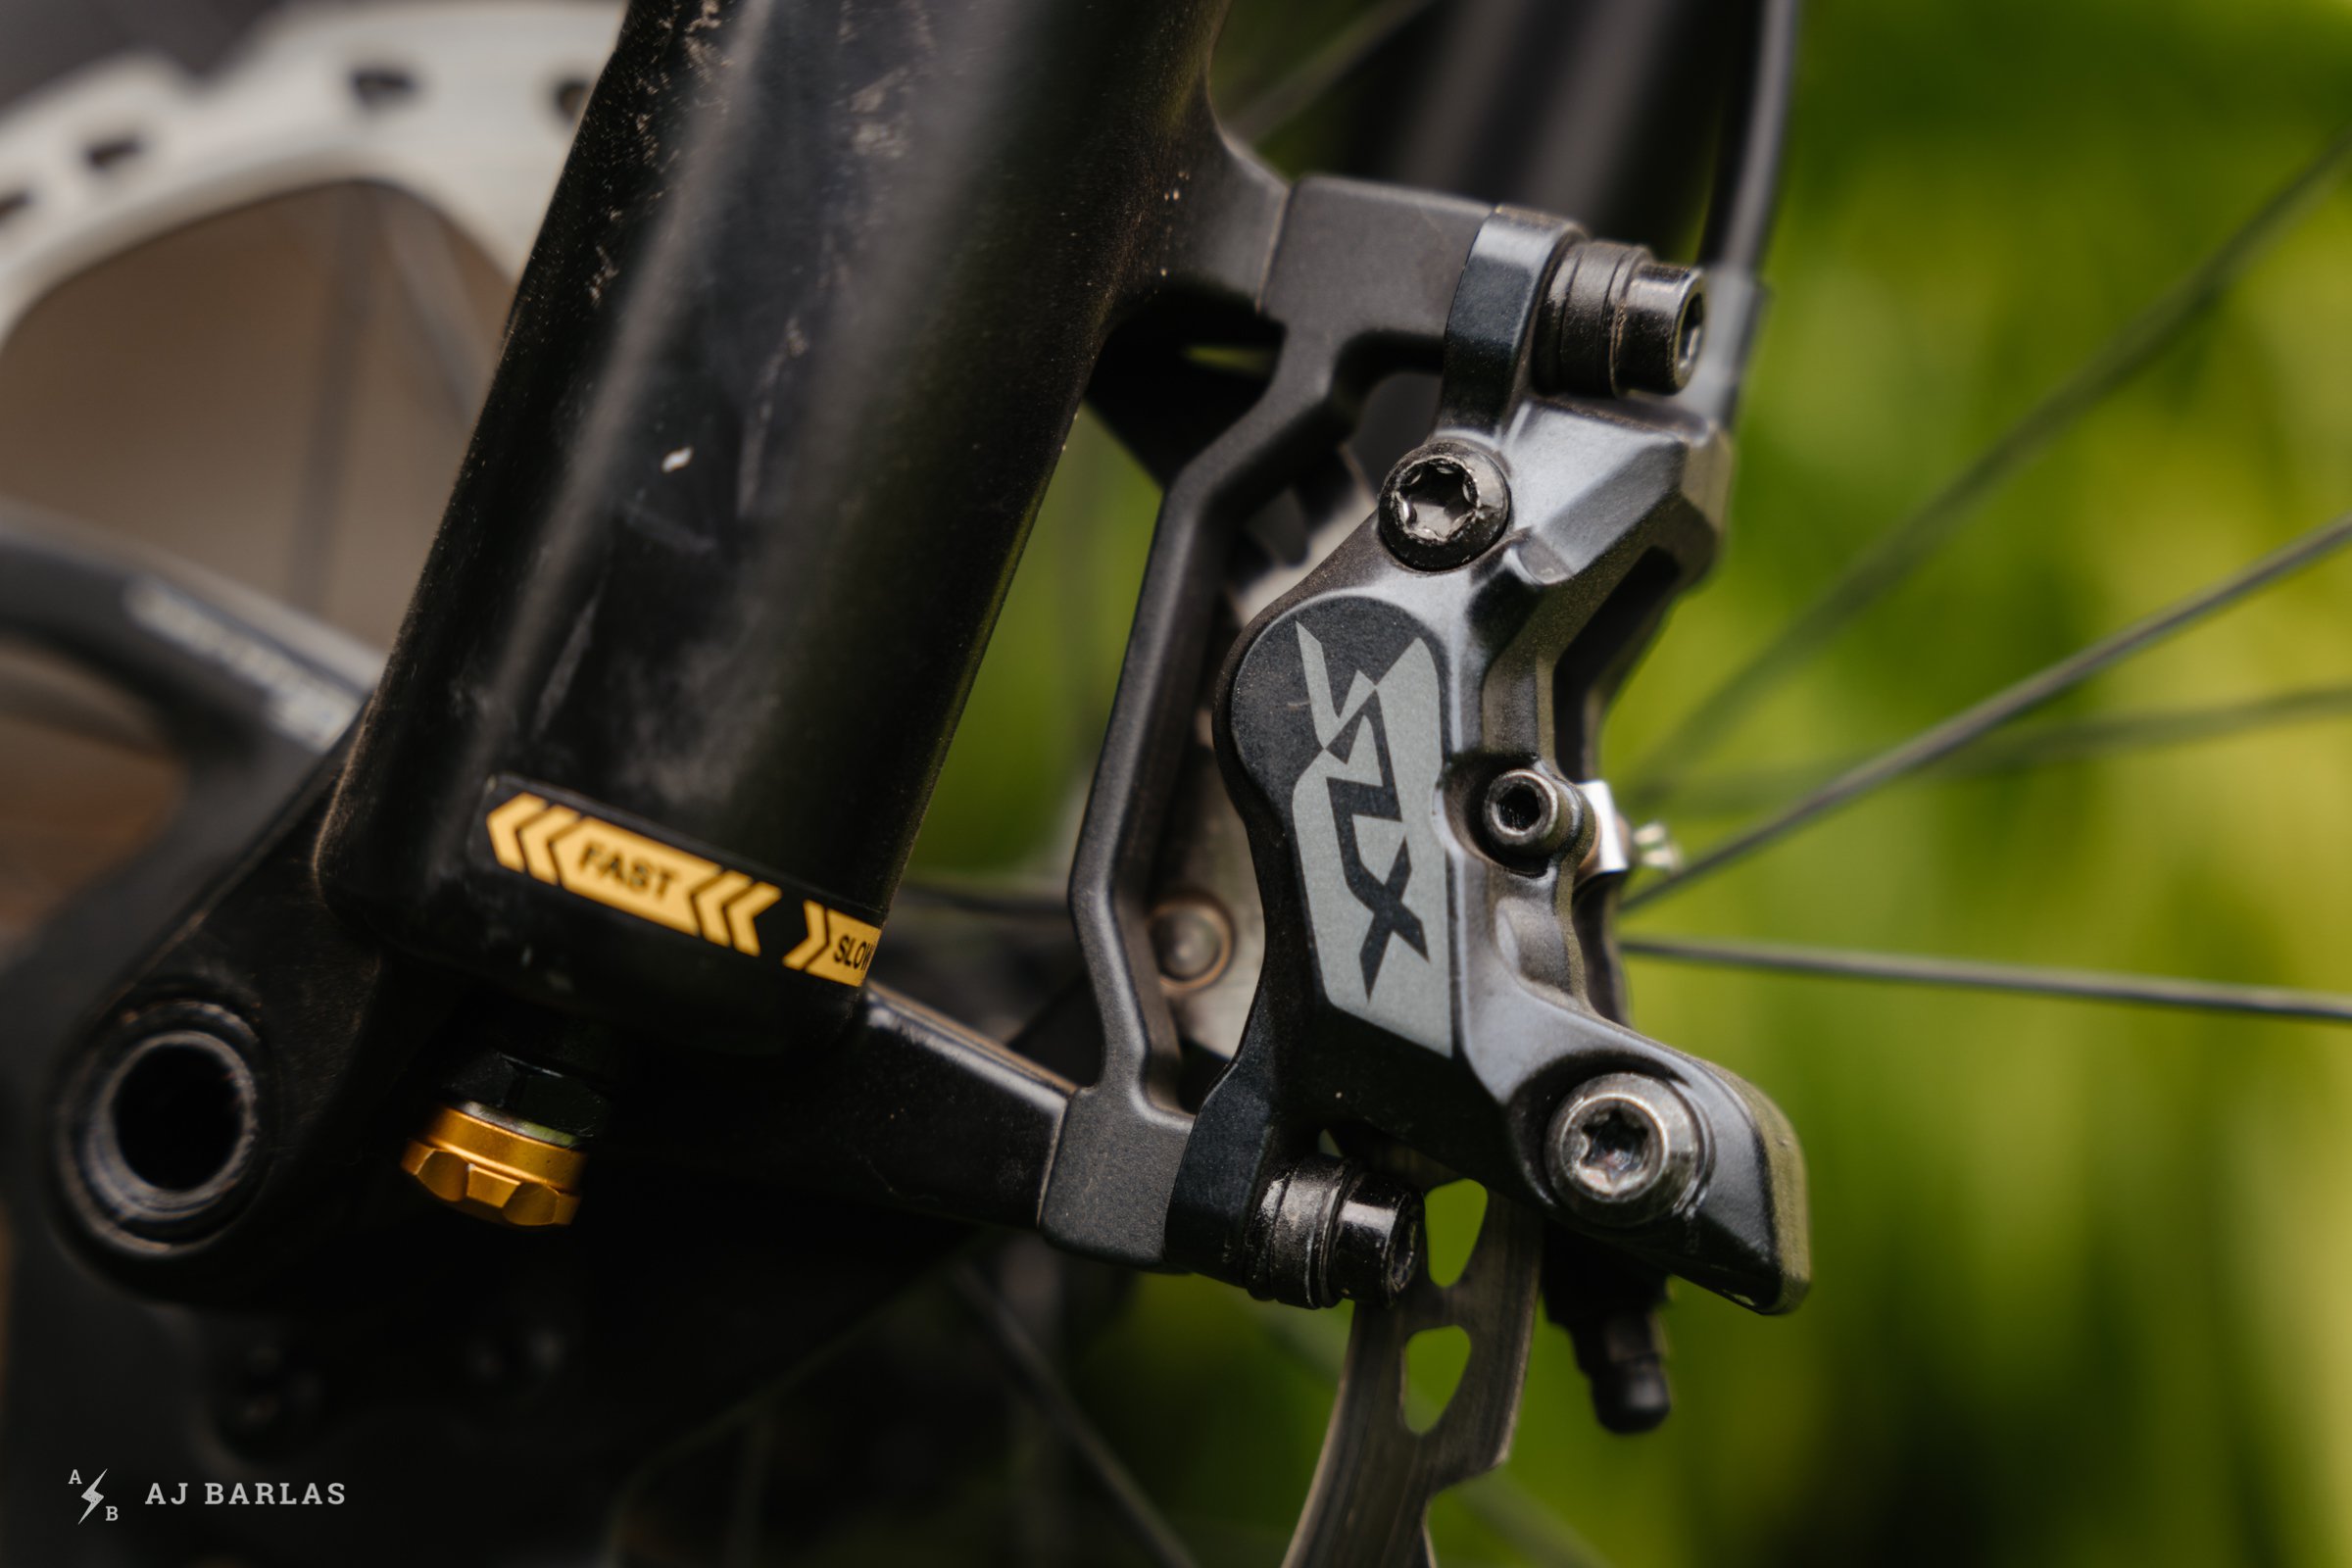 First Review: Shimano XT M8100 and SLX M7100 – presenting